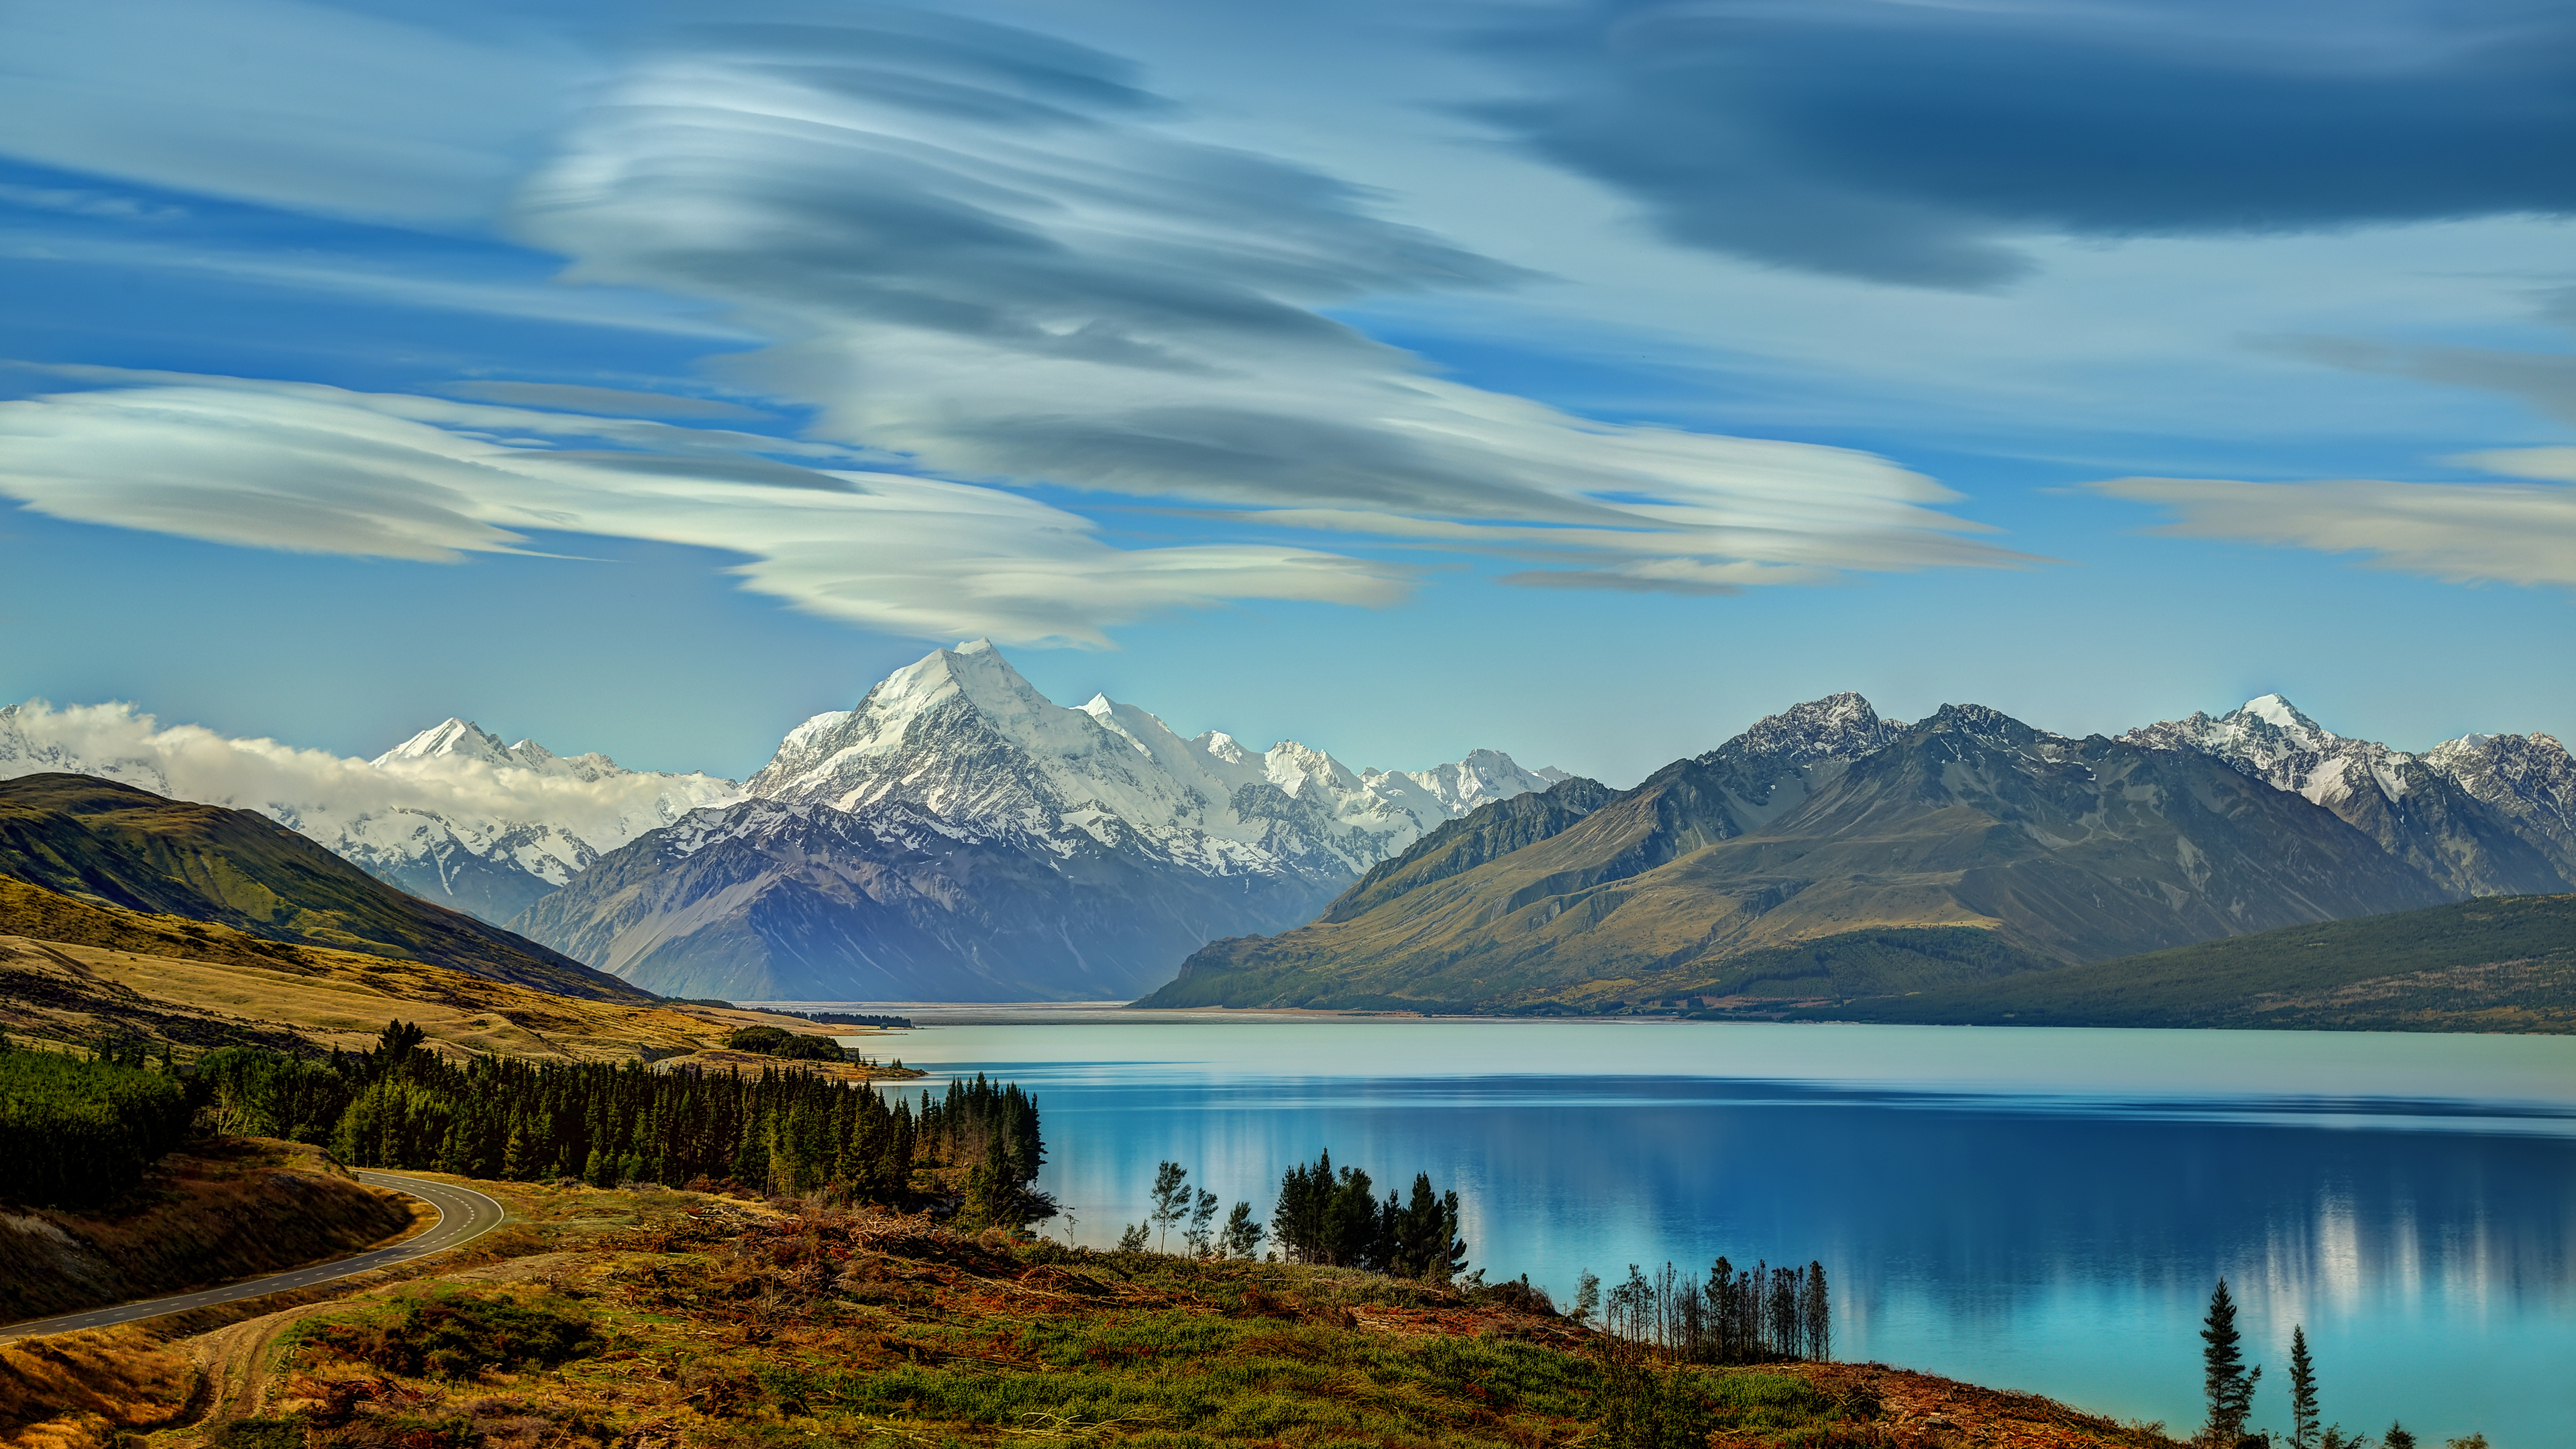 General 3840x2160 Trey Ratcliff photography landscape New Zealand nature mountains snow sky water clouds trees road